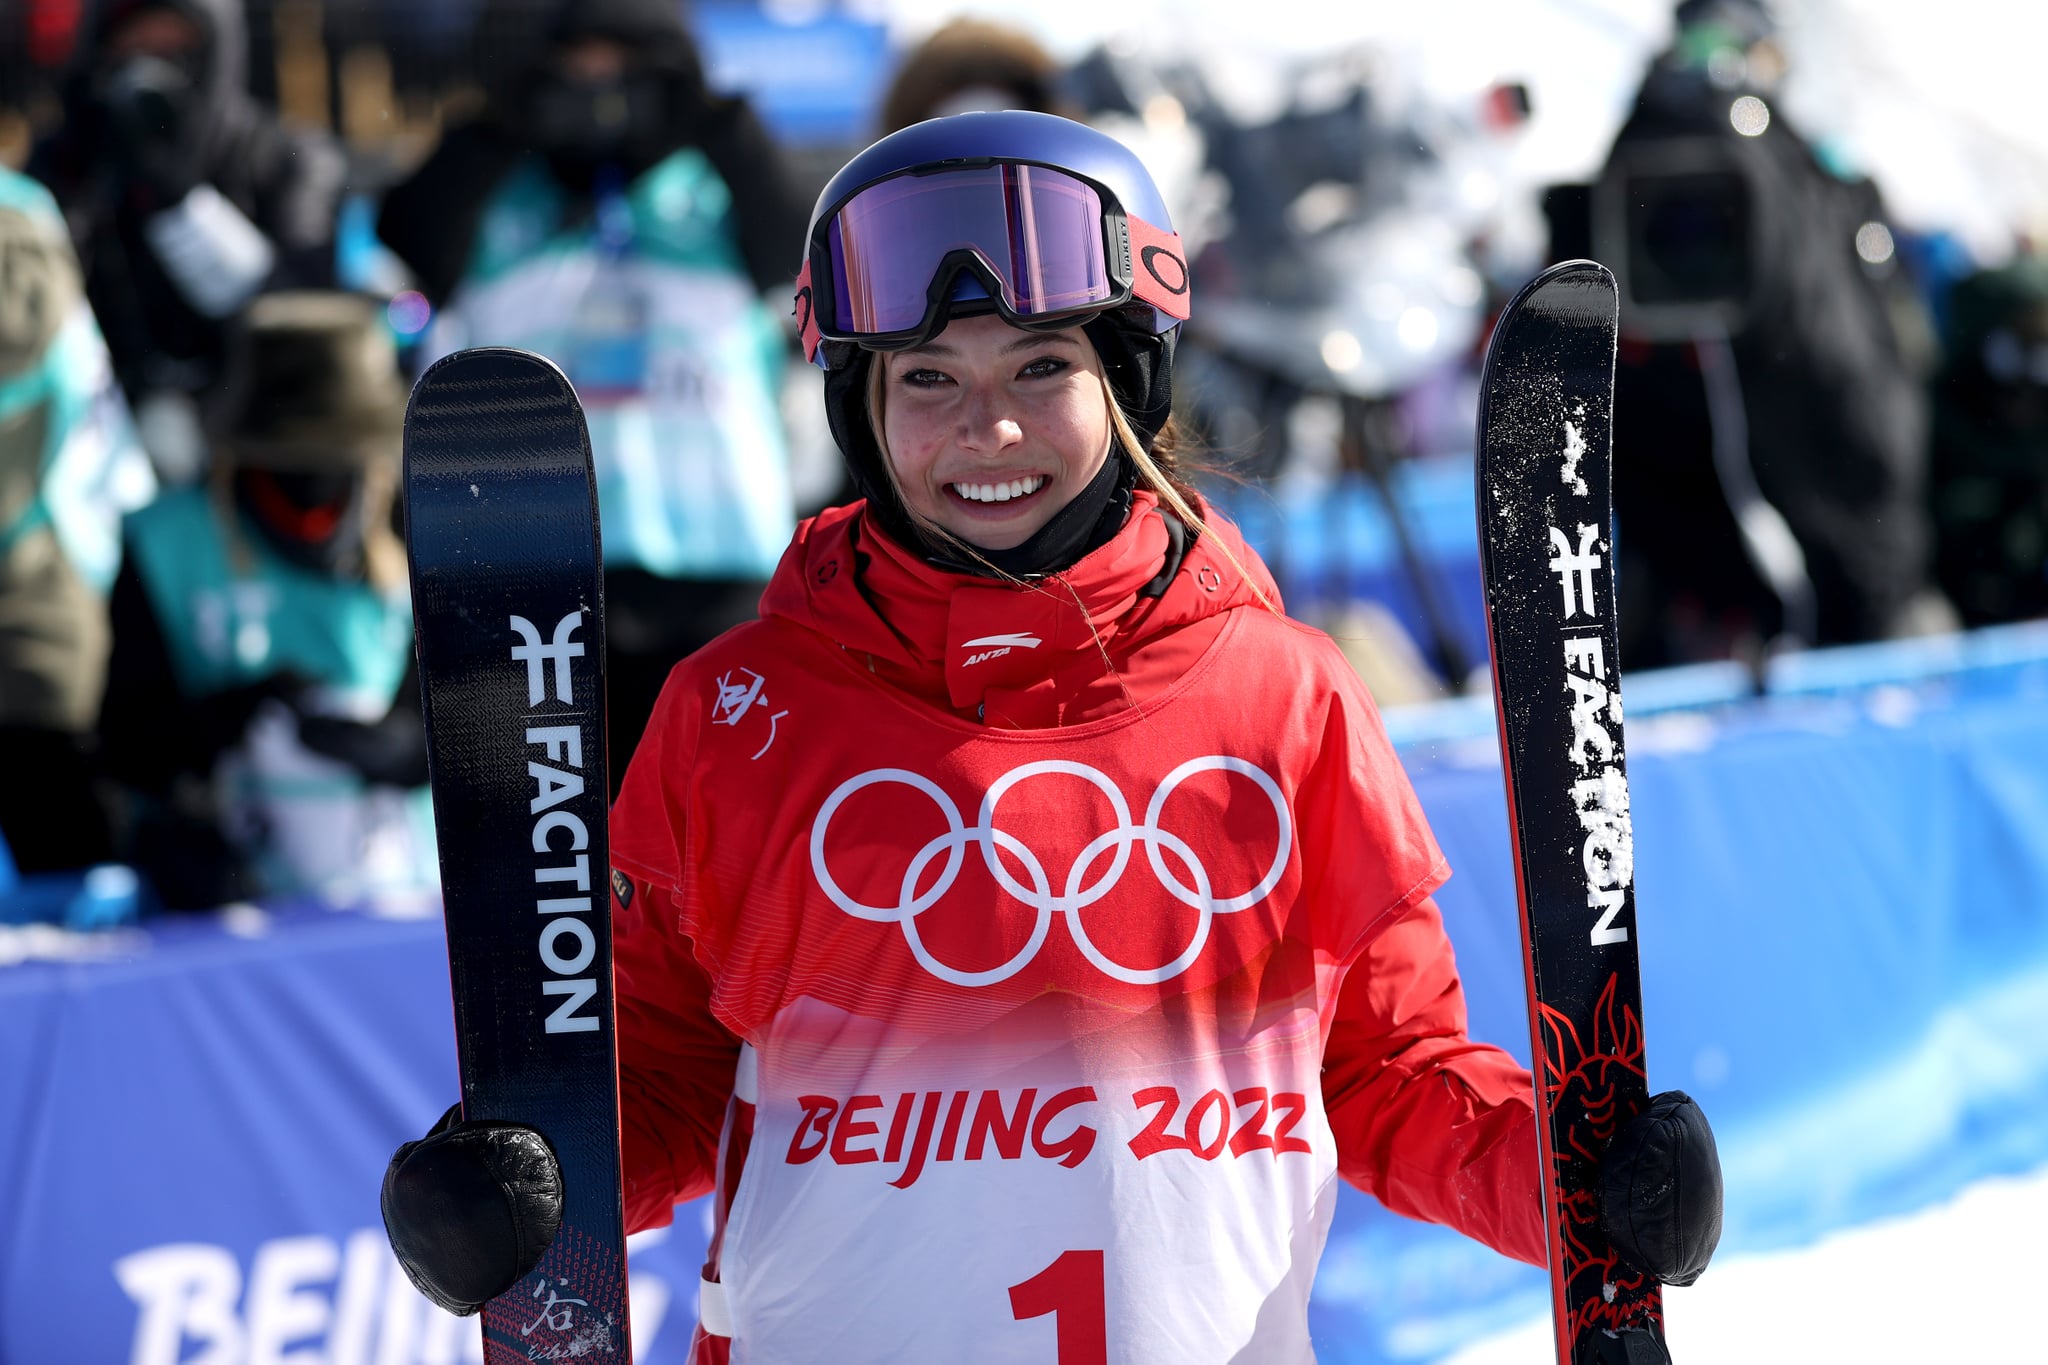 ZHANGJIAKOU, CHINA - FEBRUARY 18: Ailing Eileen Gu of Team China celebrates winning the Gold medal during the Women's Freestyle Freeski Halfpipe Final on Day 14 of the Beijing 2022 Winter Olympics at Genting Snow Park on February 18, 2022 in Zhangjiakou, China. (Photo by Ezra Shaw/Getty Images)